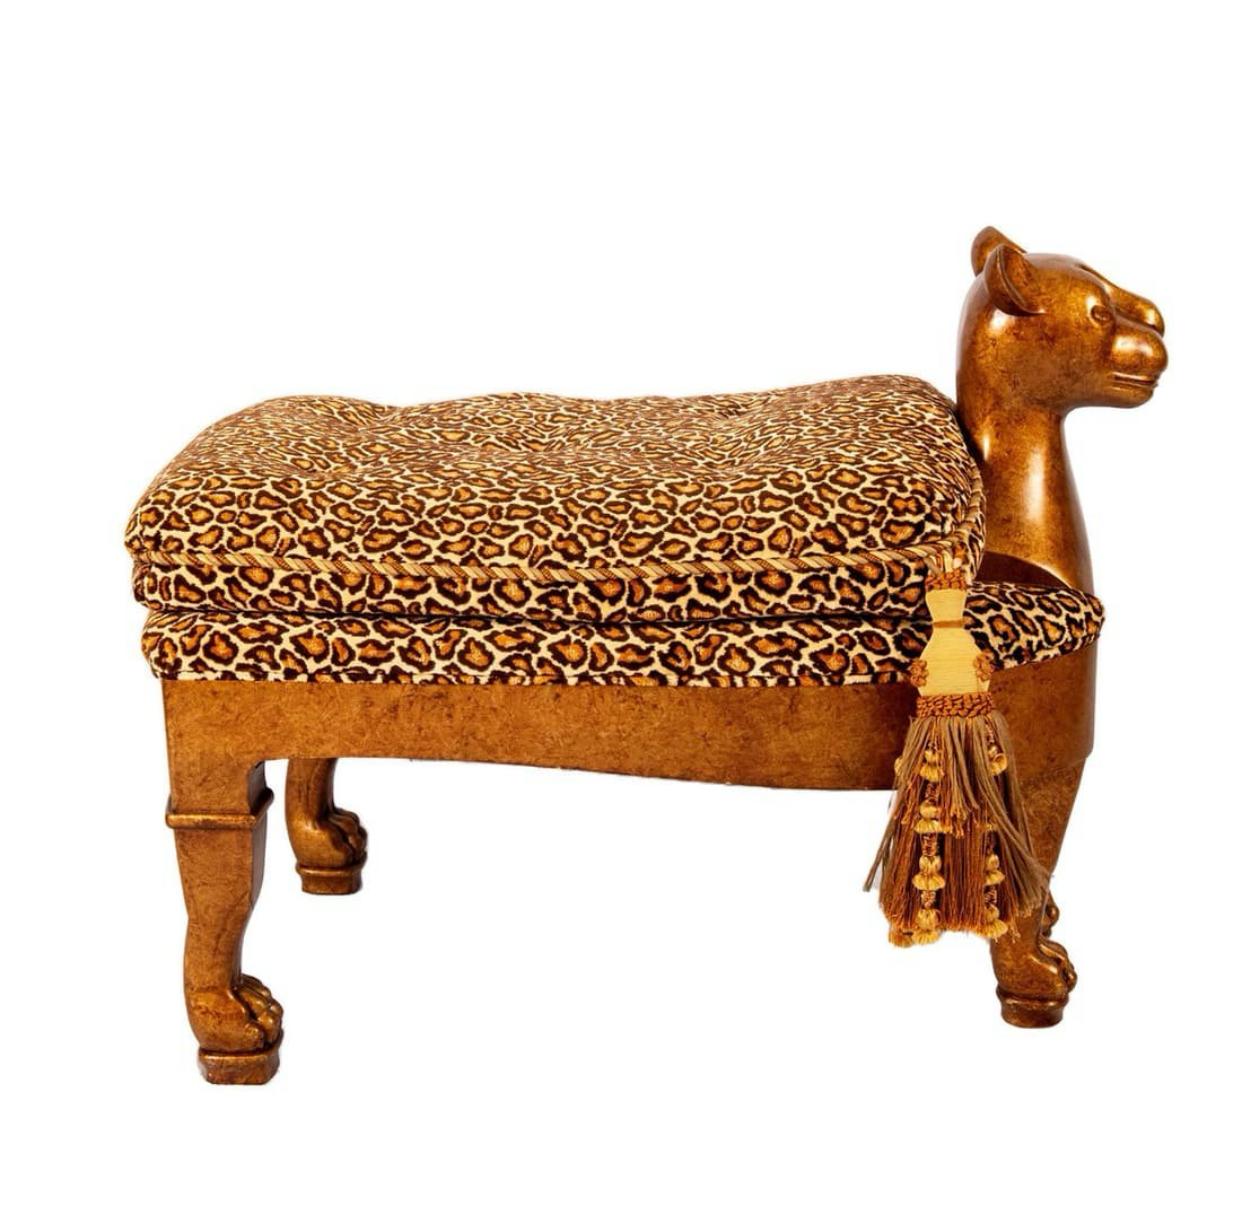 Egyptian Revival Gilt & Lacquered Nicely Carved Cat Bench For Sale 3